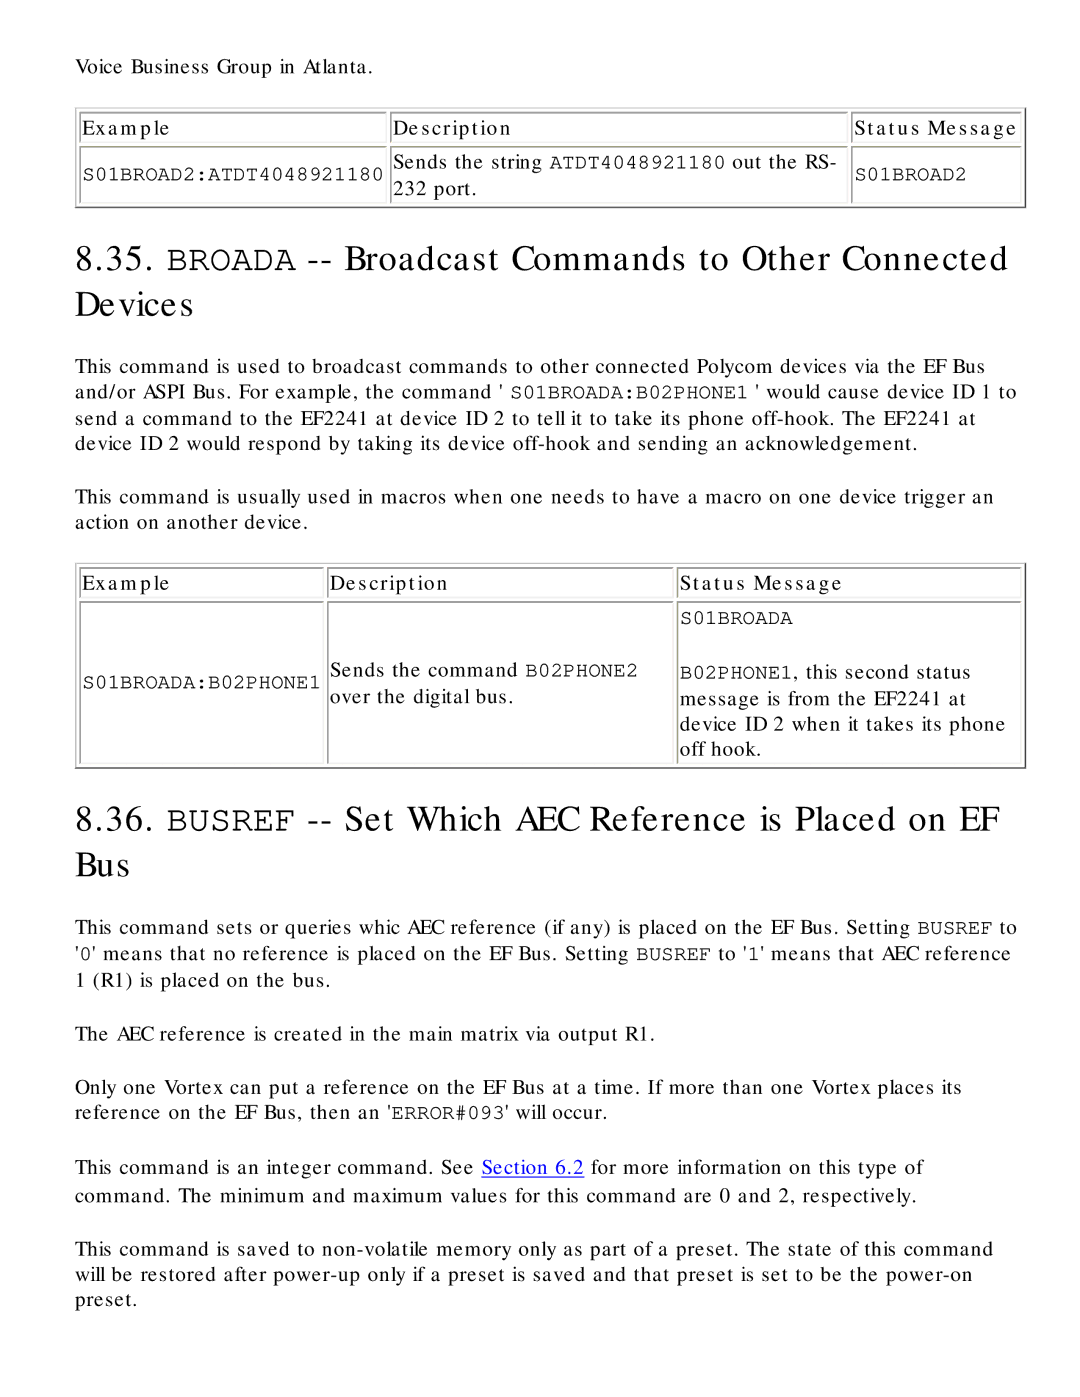 Polycom RS-232 Broada -- Broadcast Commands to Other Connected Devices, Busref -- Set Which AEC Reference is Placed on EF 